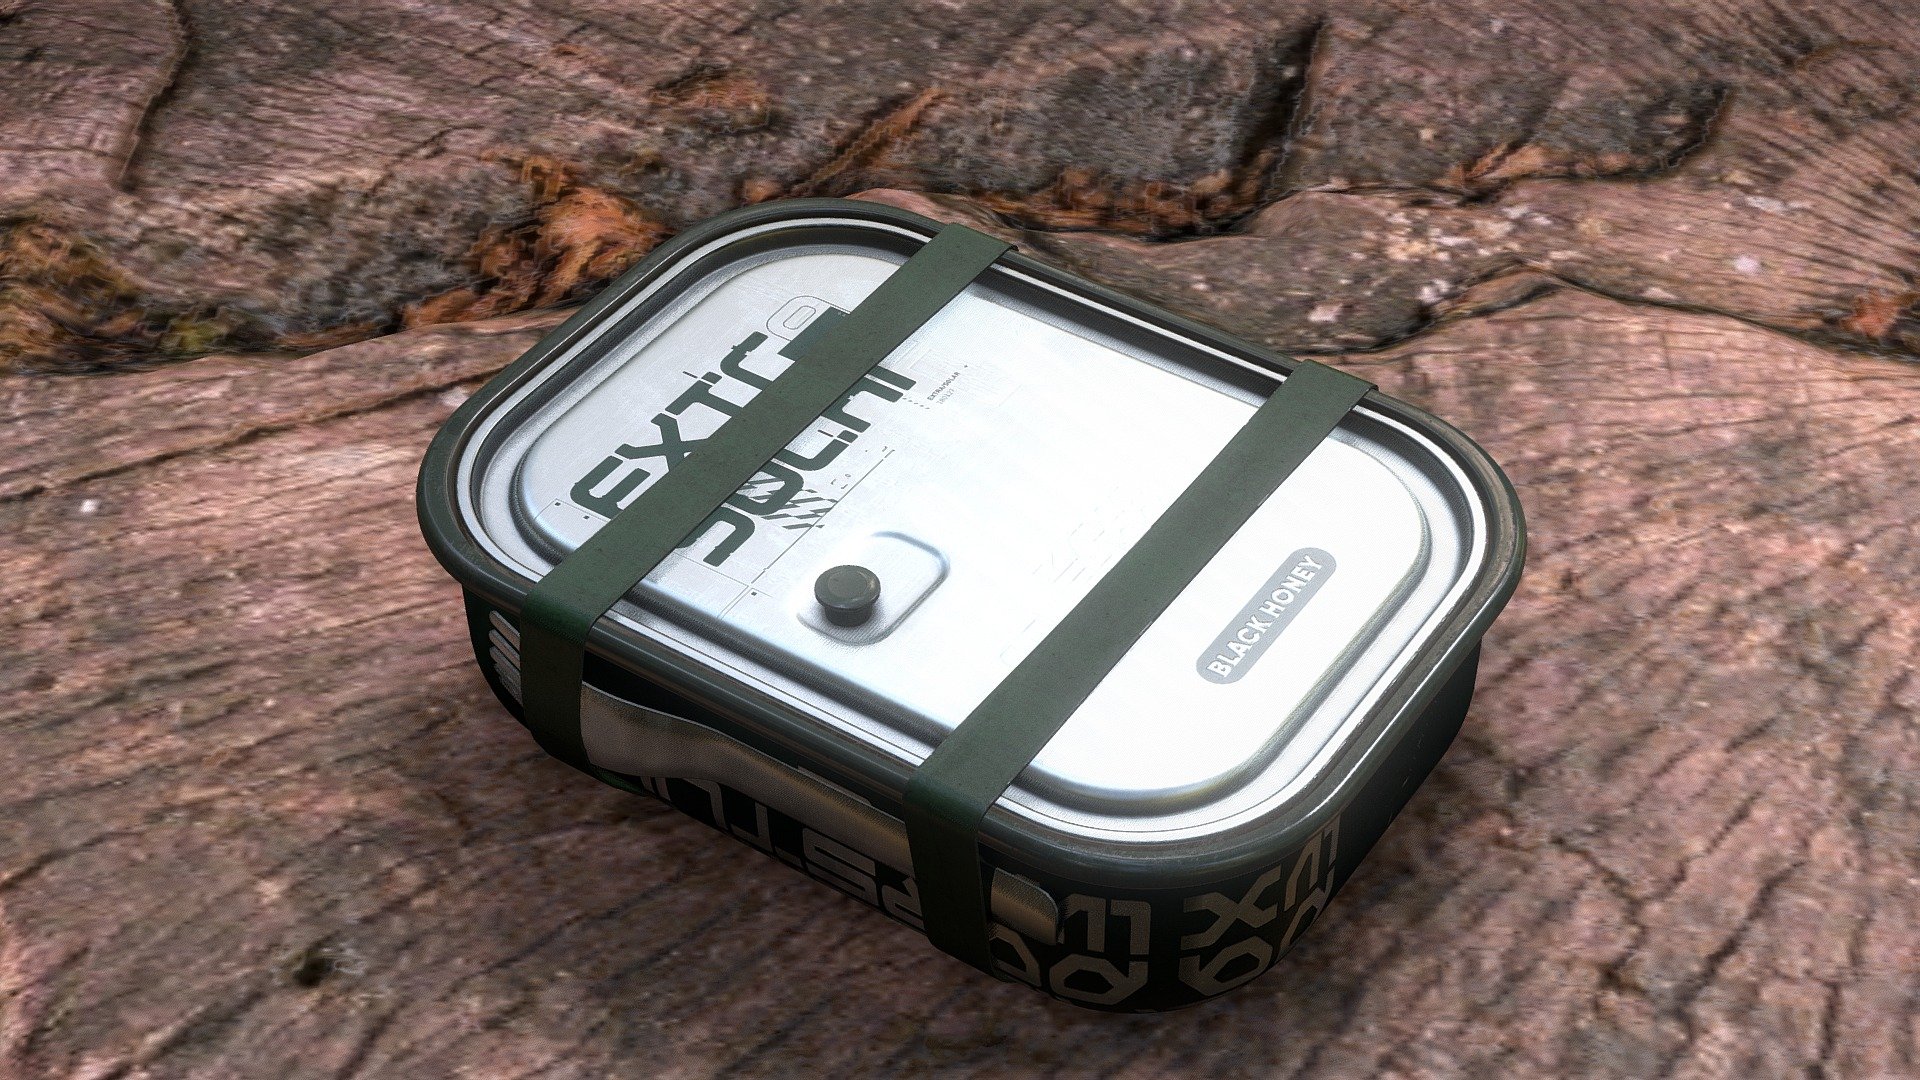 Leak-proof stainless steel lunch box. Oven and freezer safe
Includes fork.

Drag and Drop and you are good to go. 4k Textures.

Check my profile for free models https://sketchfab.com/re1monsen If you enjoy my work please consider supporting me I have many affordable models in the shop. Smash that follow!

The original stump was scanned by /AlexandreGonzalezRivas and I baked it to another mesh.

Feel free to contact me. I’d love yo hear from you.

Thanks! - Woodsman Collection - Lunch Box - Download Free 3D model by re1monsen 3d model